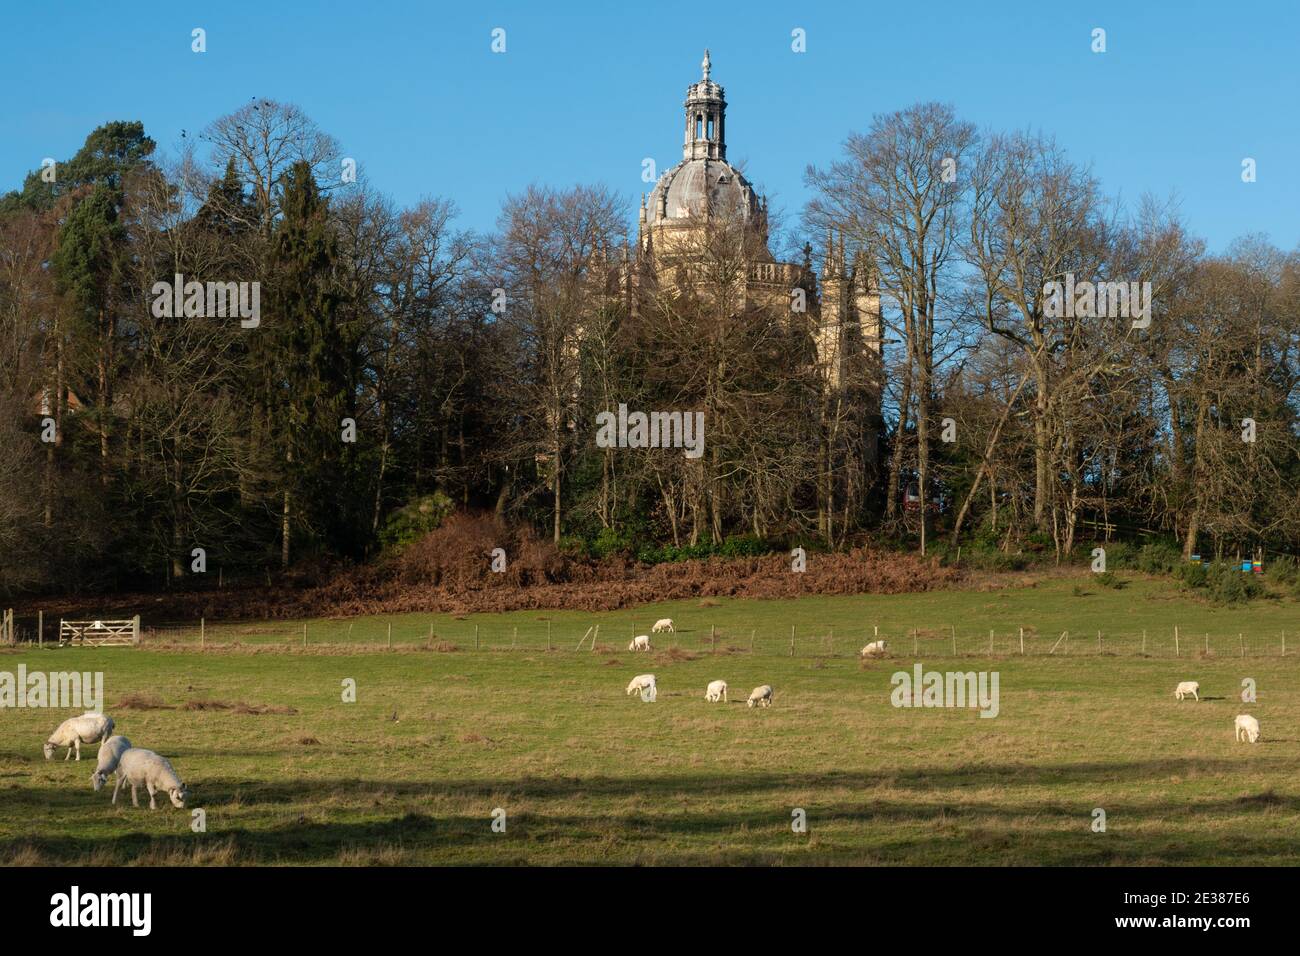 The church at St. Michael's Abbey, a Benedictine monastery in Farnborough, Hampshire, UK, with sheep grazing in a field in the foreground Stock Photo